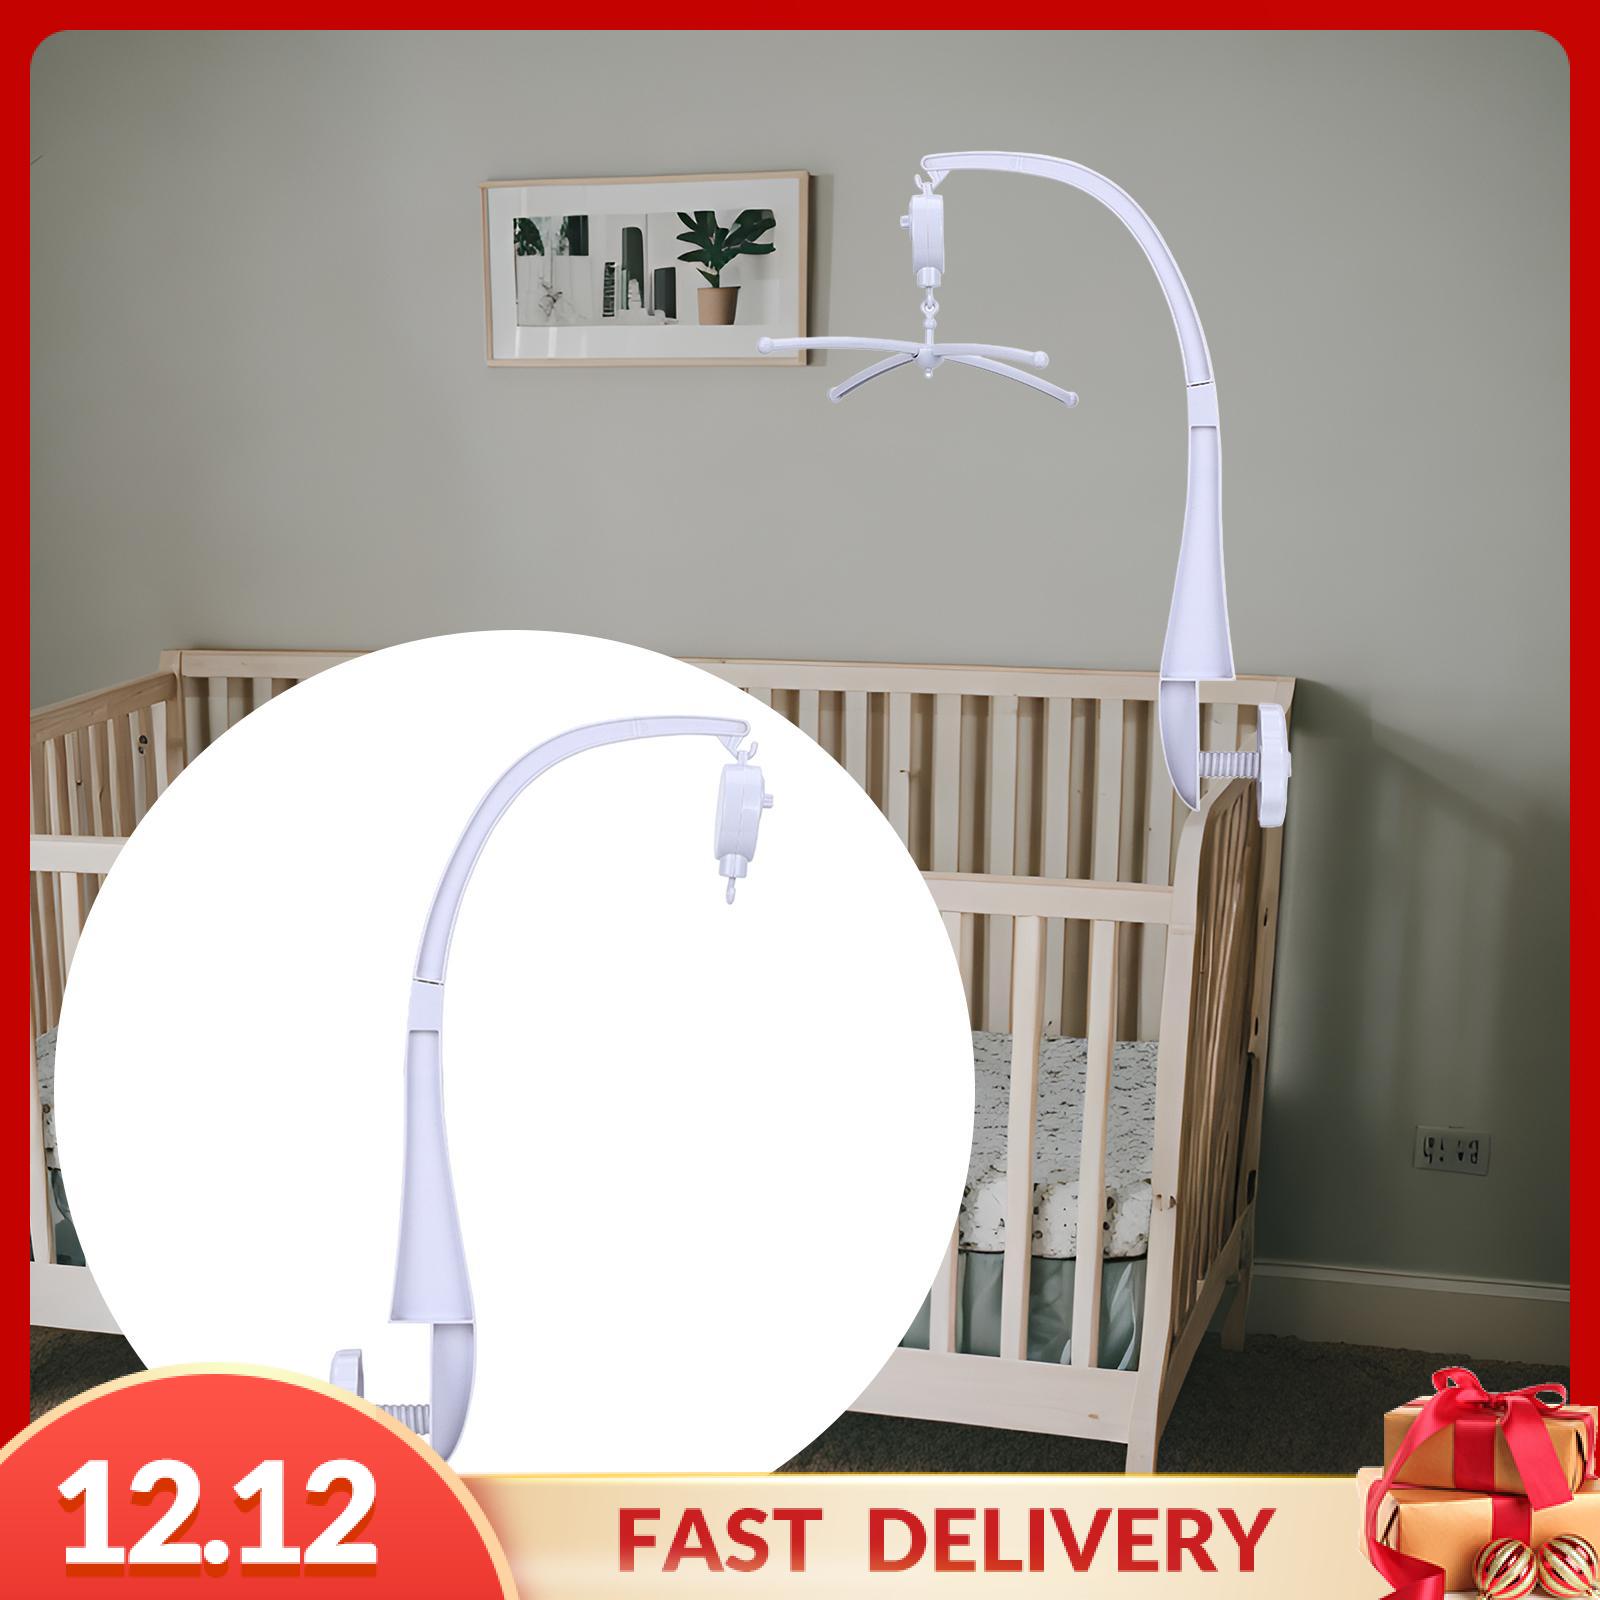 Pezhong Cot Mobiles for Babies, Baby Mobile Hanger, Cot Mobile Arm